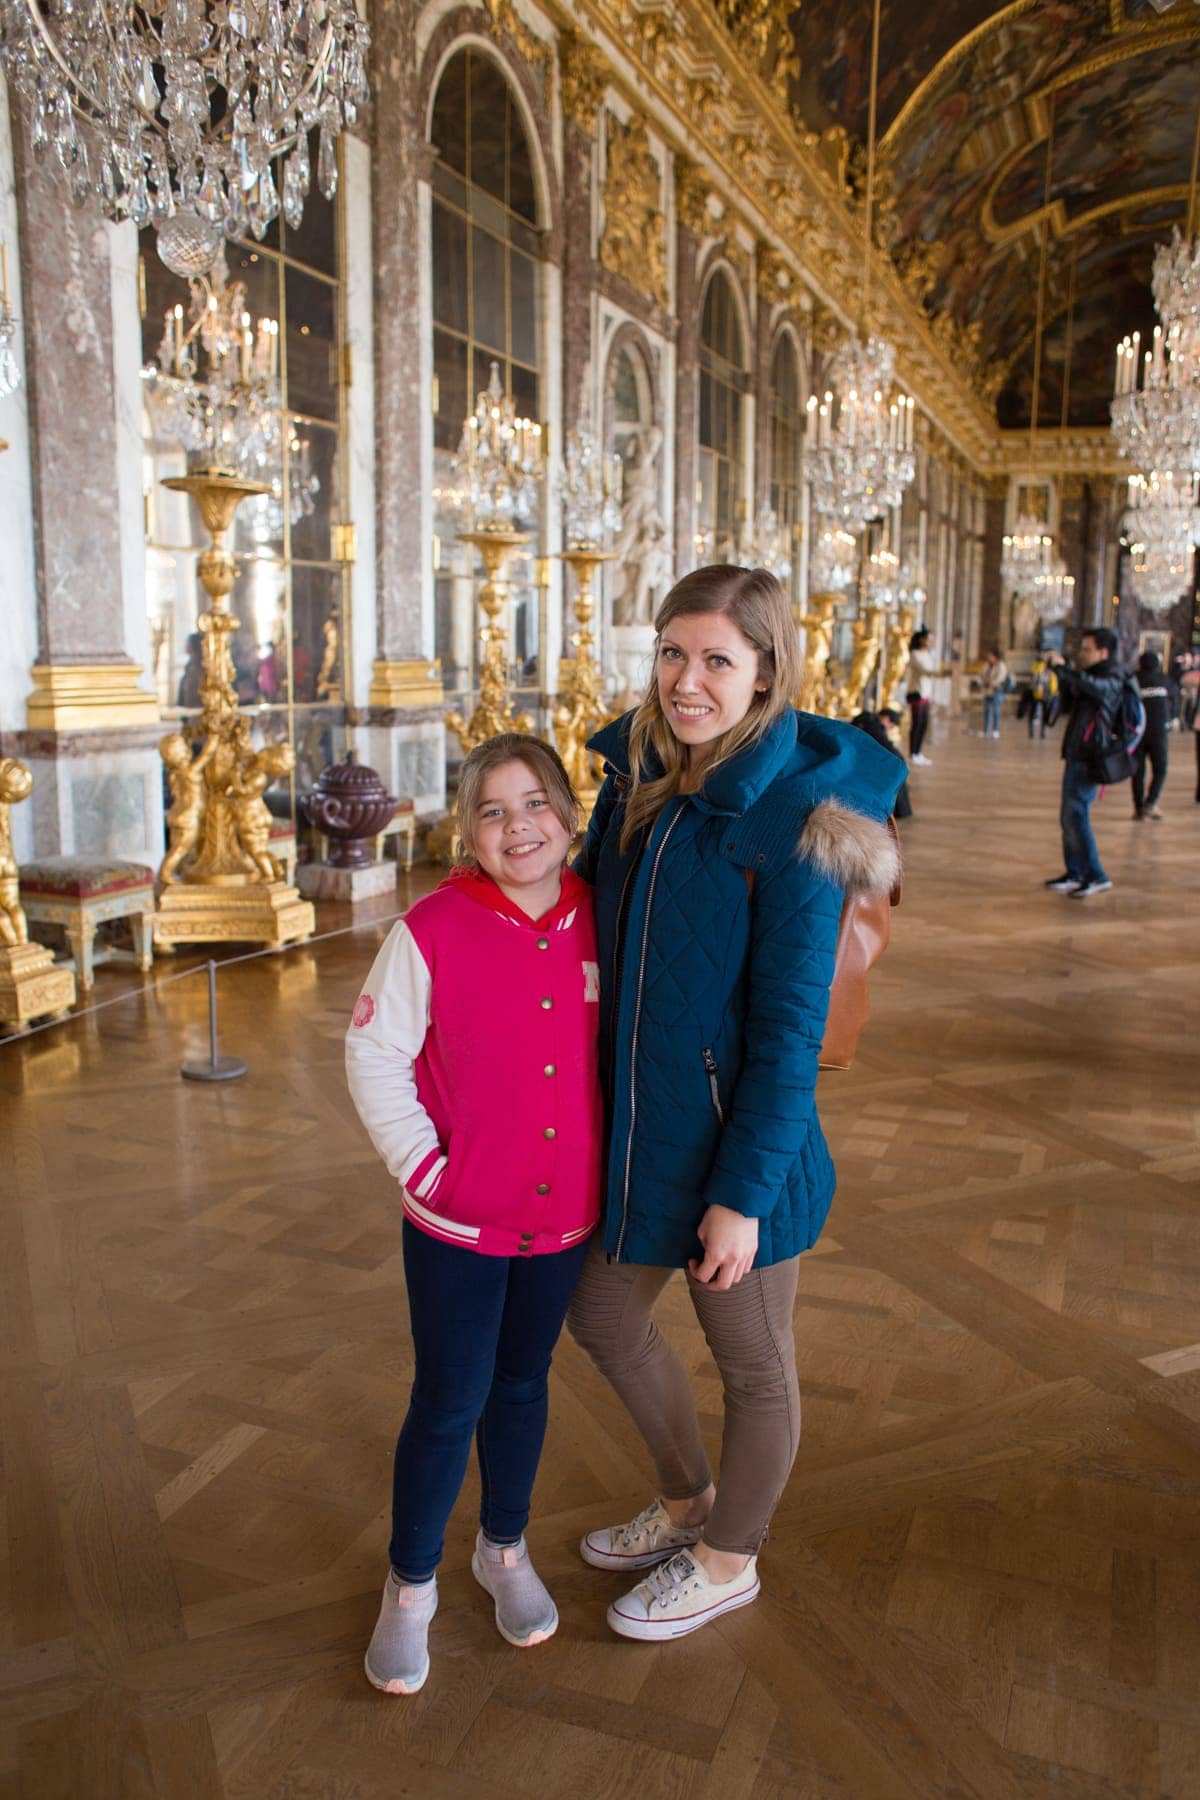 Lauren and Brooke in the palace